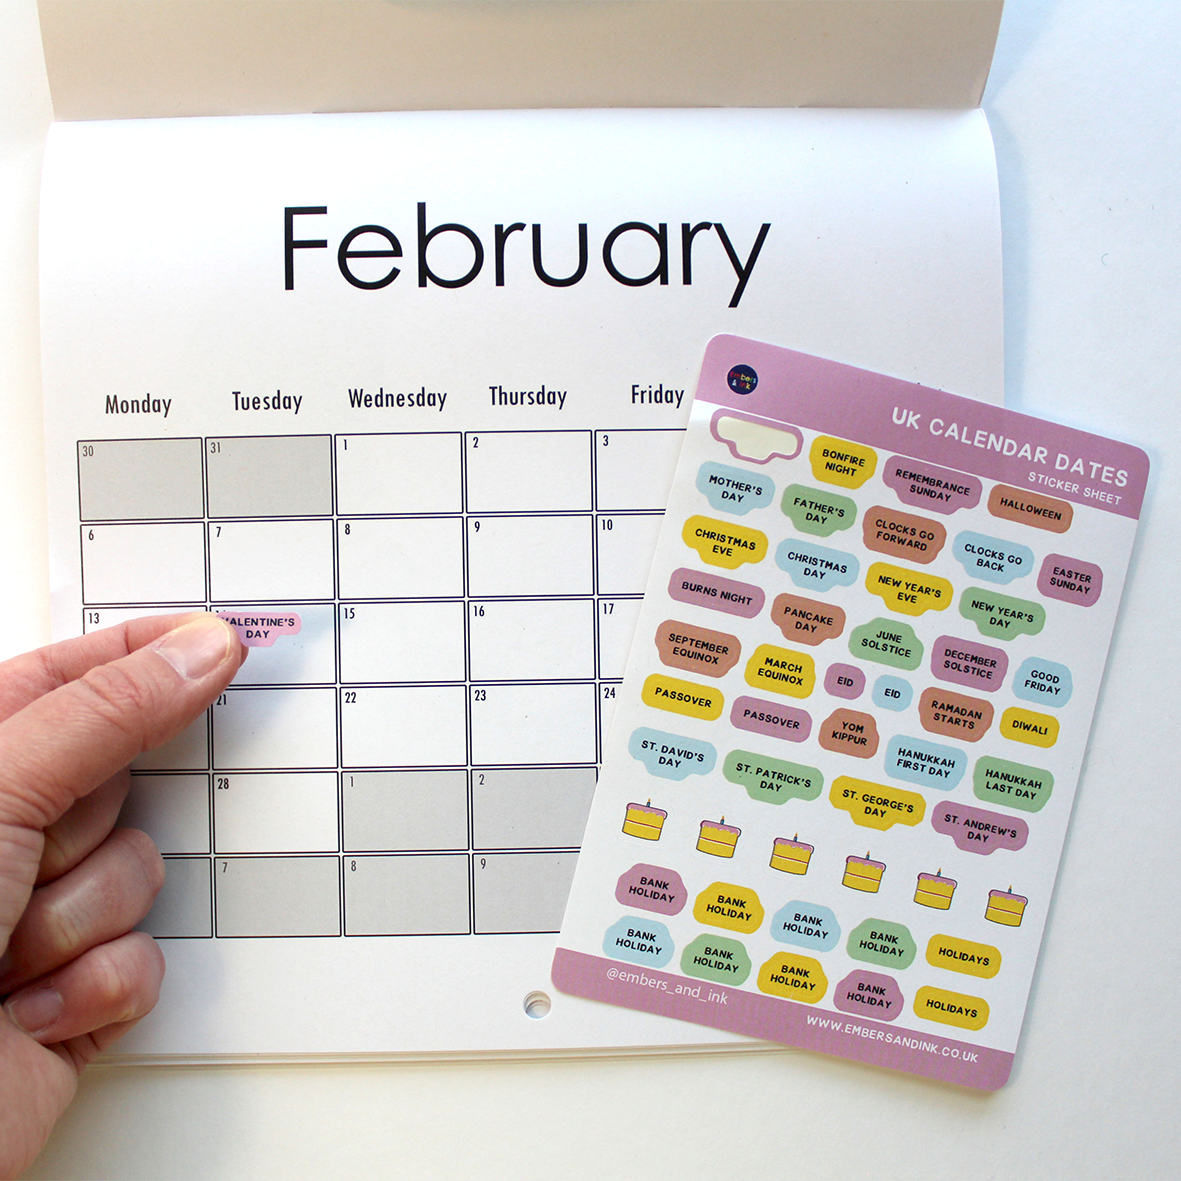 A hand is shown adding the Valentine's Day sticker from the sticker sheet, onto a calendar on February 14th